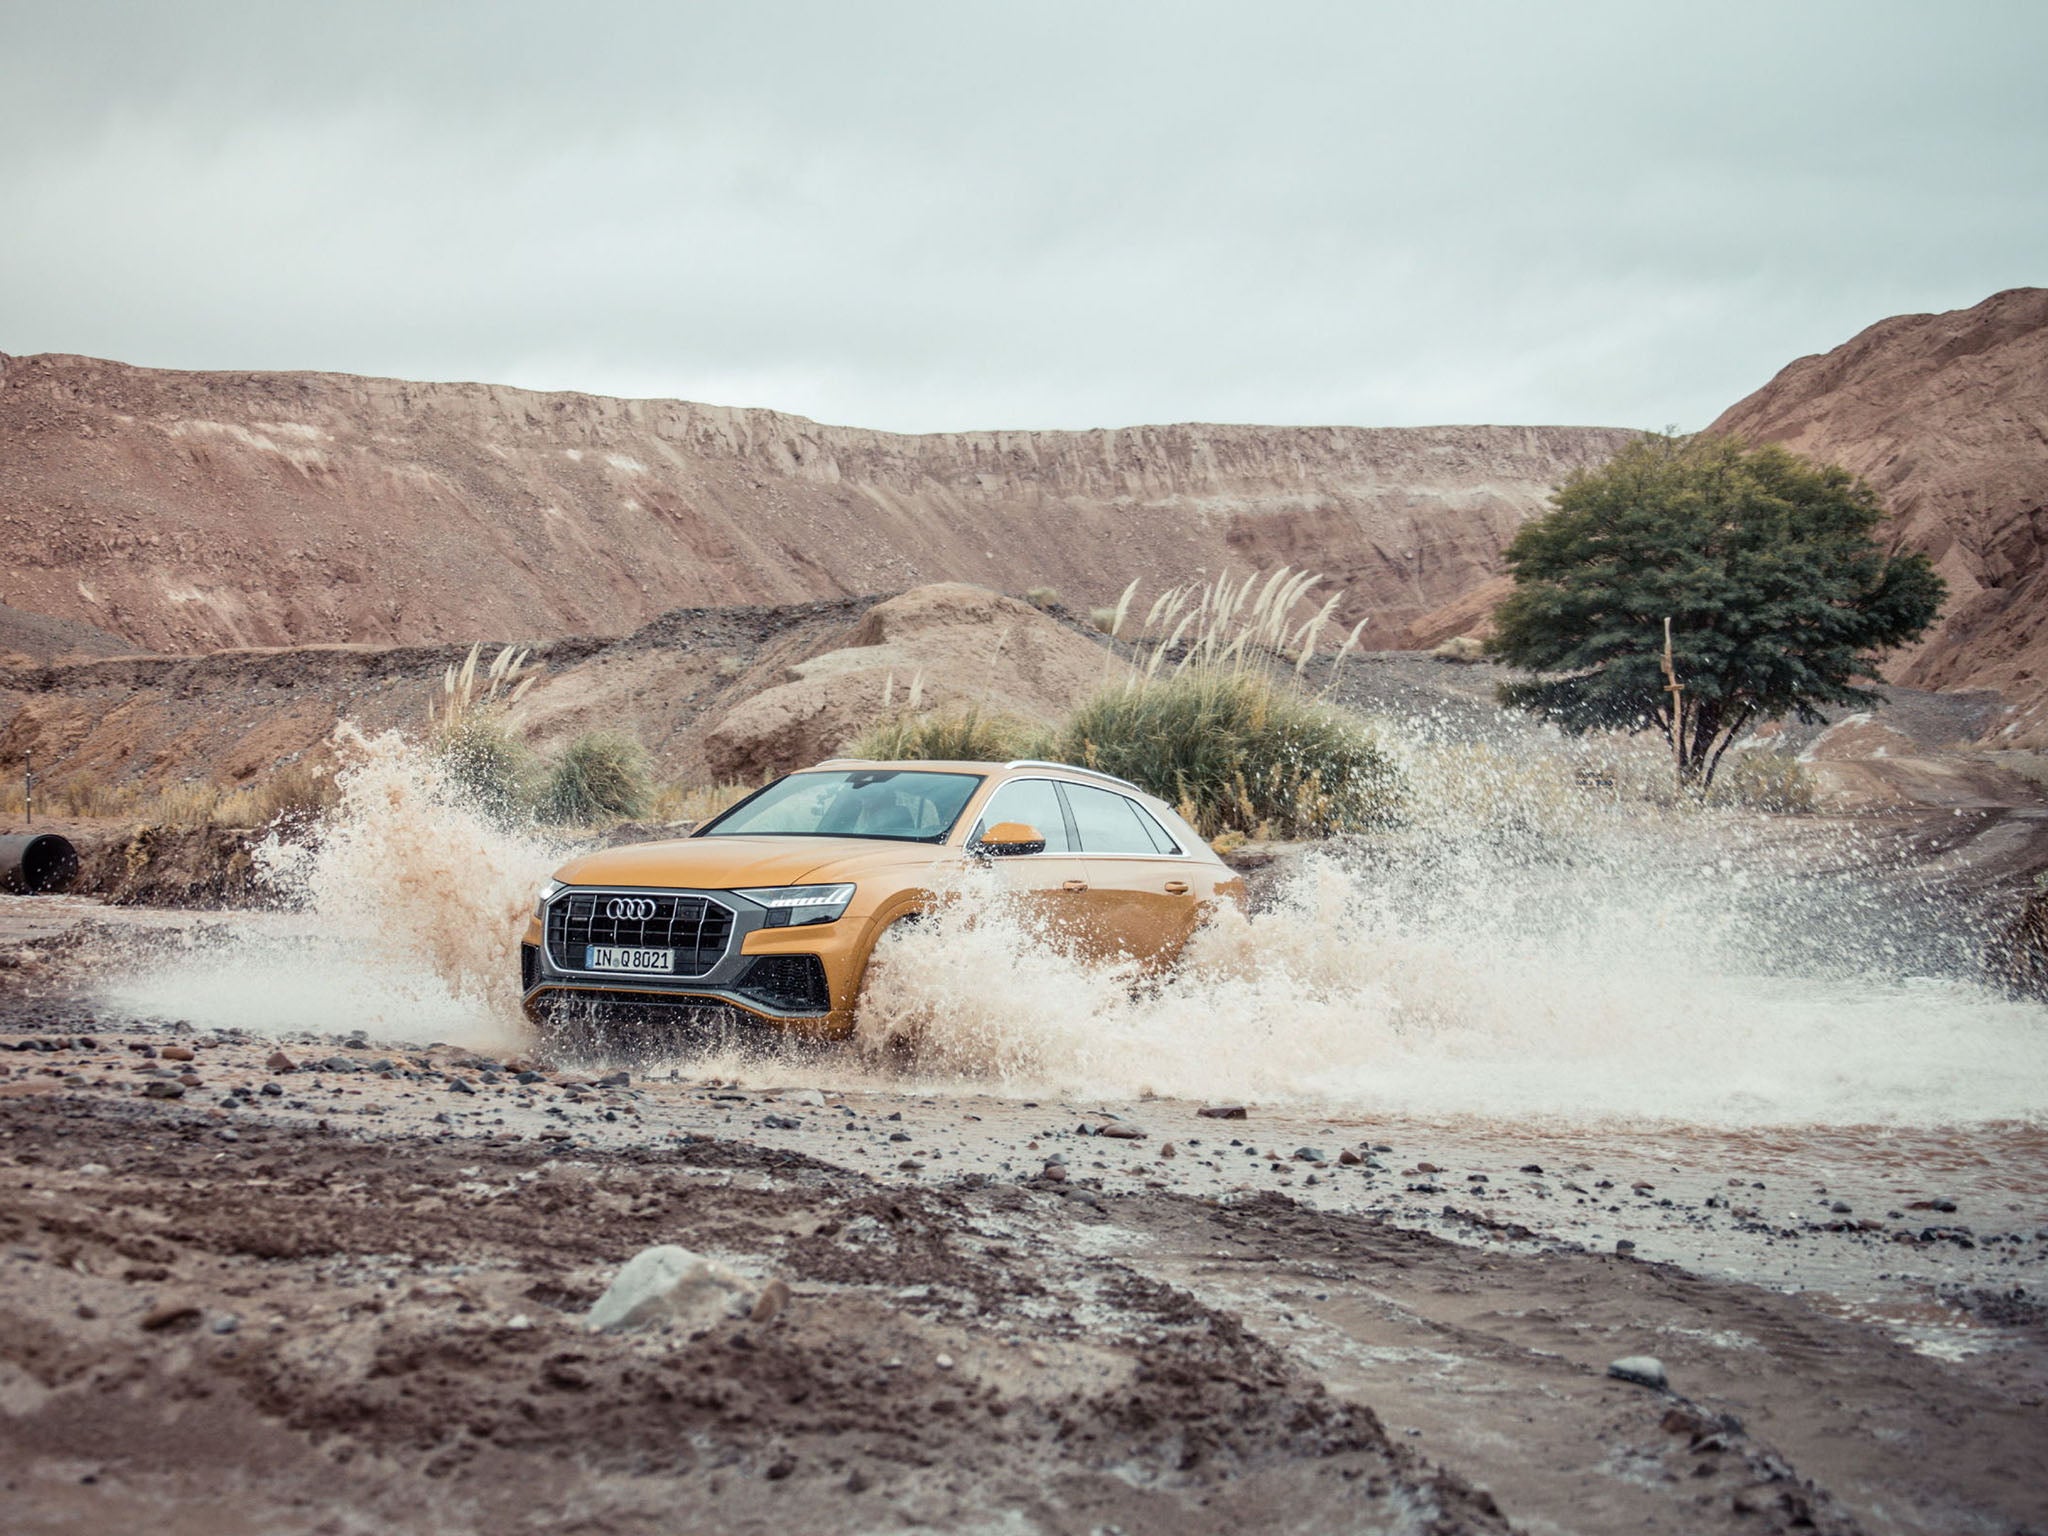 The Audi Q8 features four-wheel steering and other tech